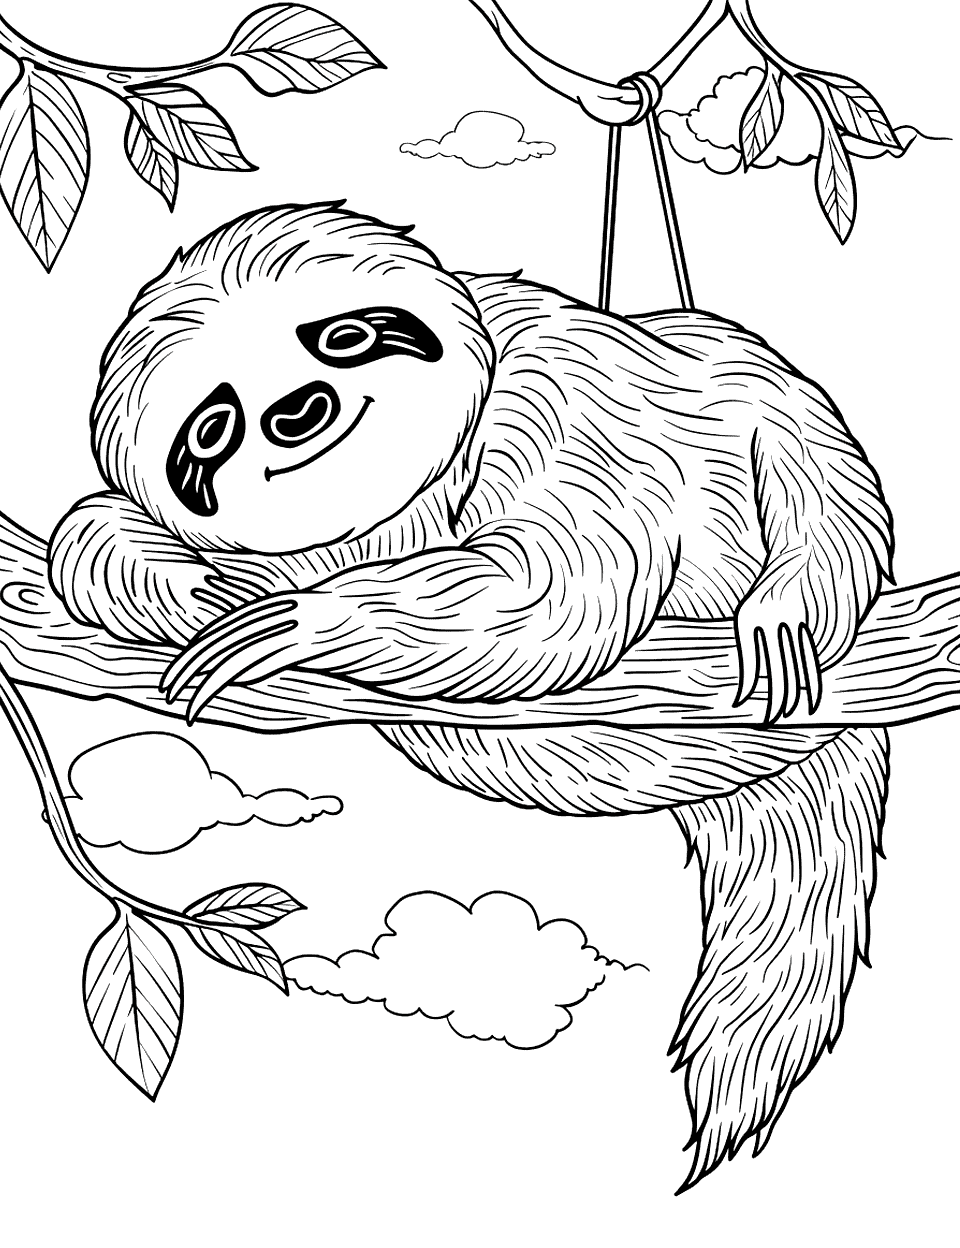 Sleepy Sloth on a Lazy Afternoon Coloring Page - A sloth sleeping peacefully on a branch, with a backdrop of soft clouds in the sky.